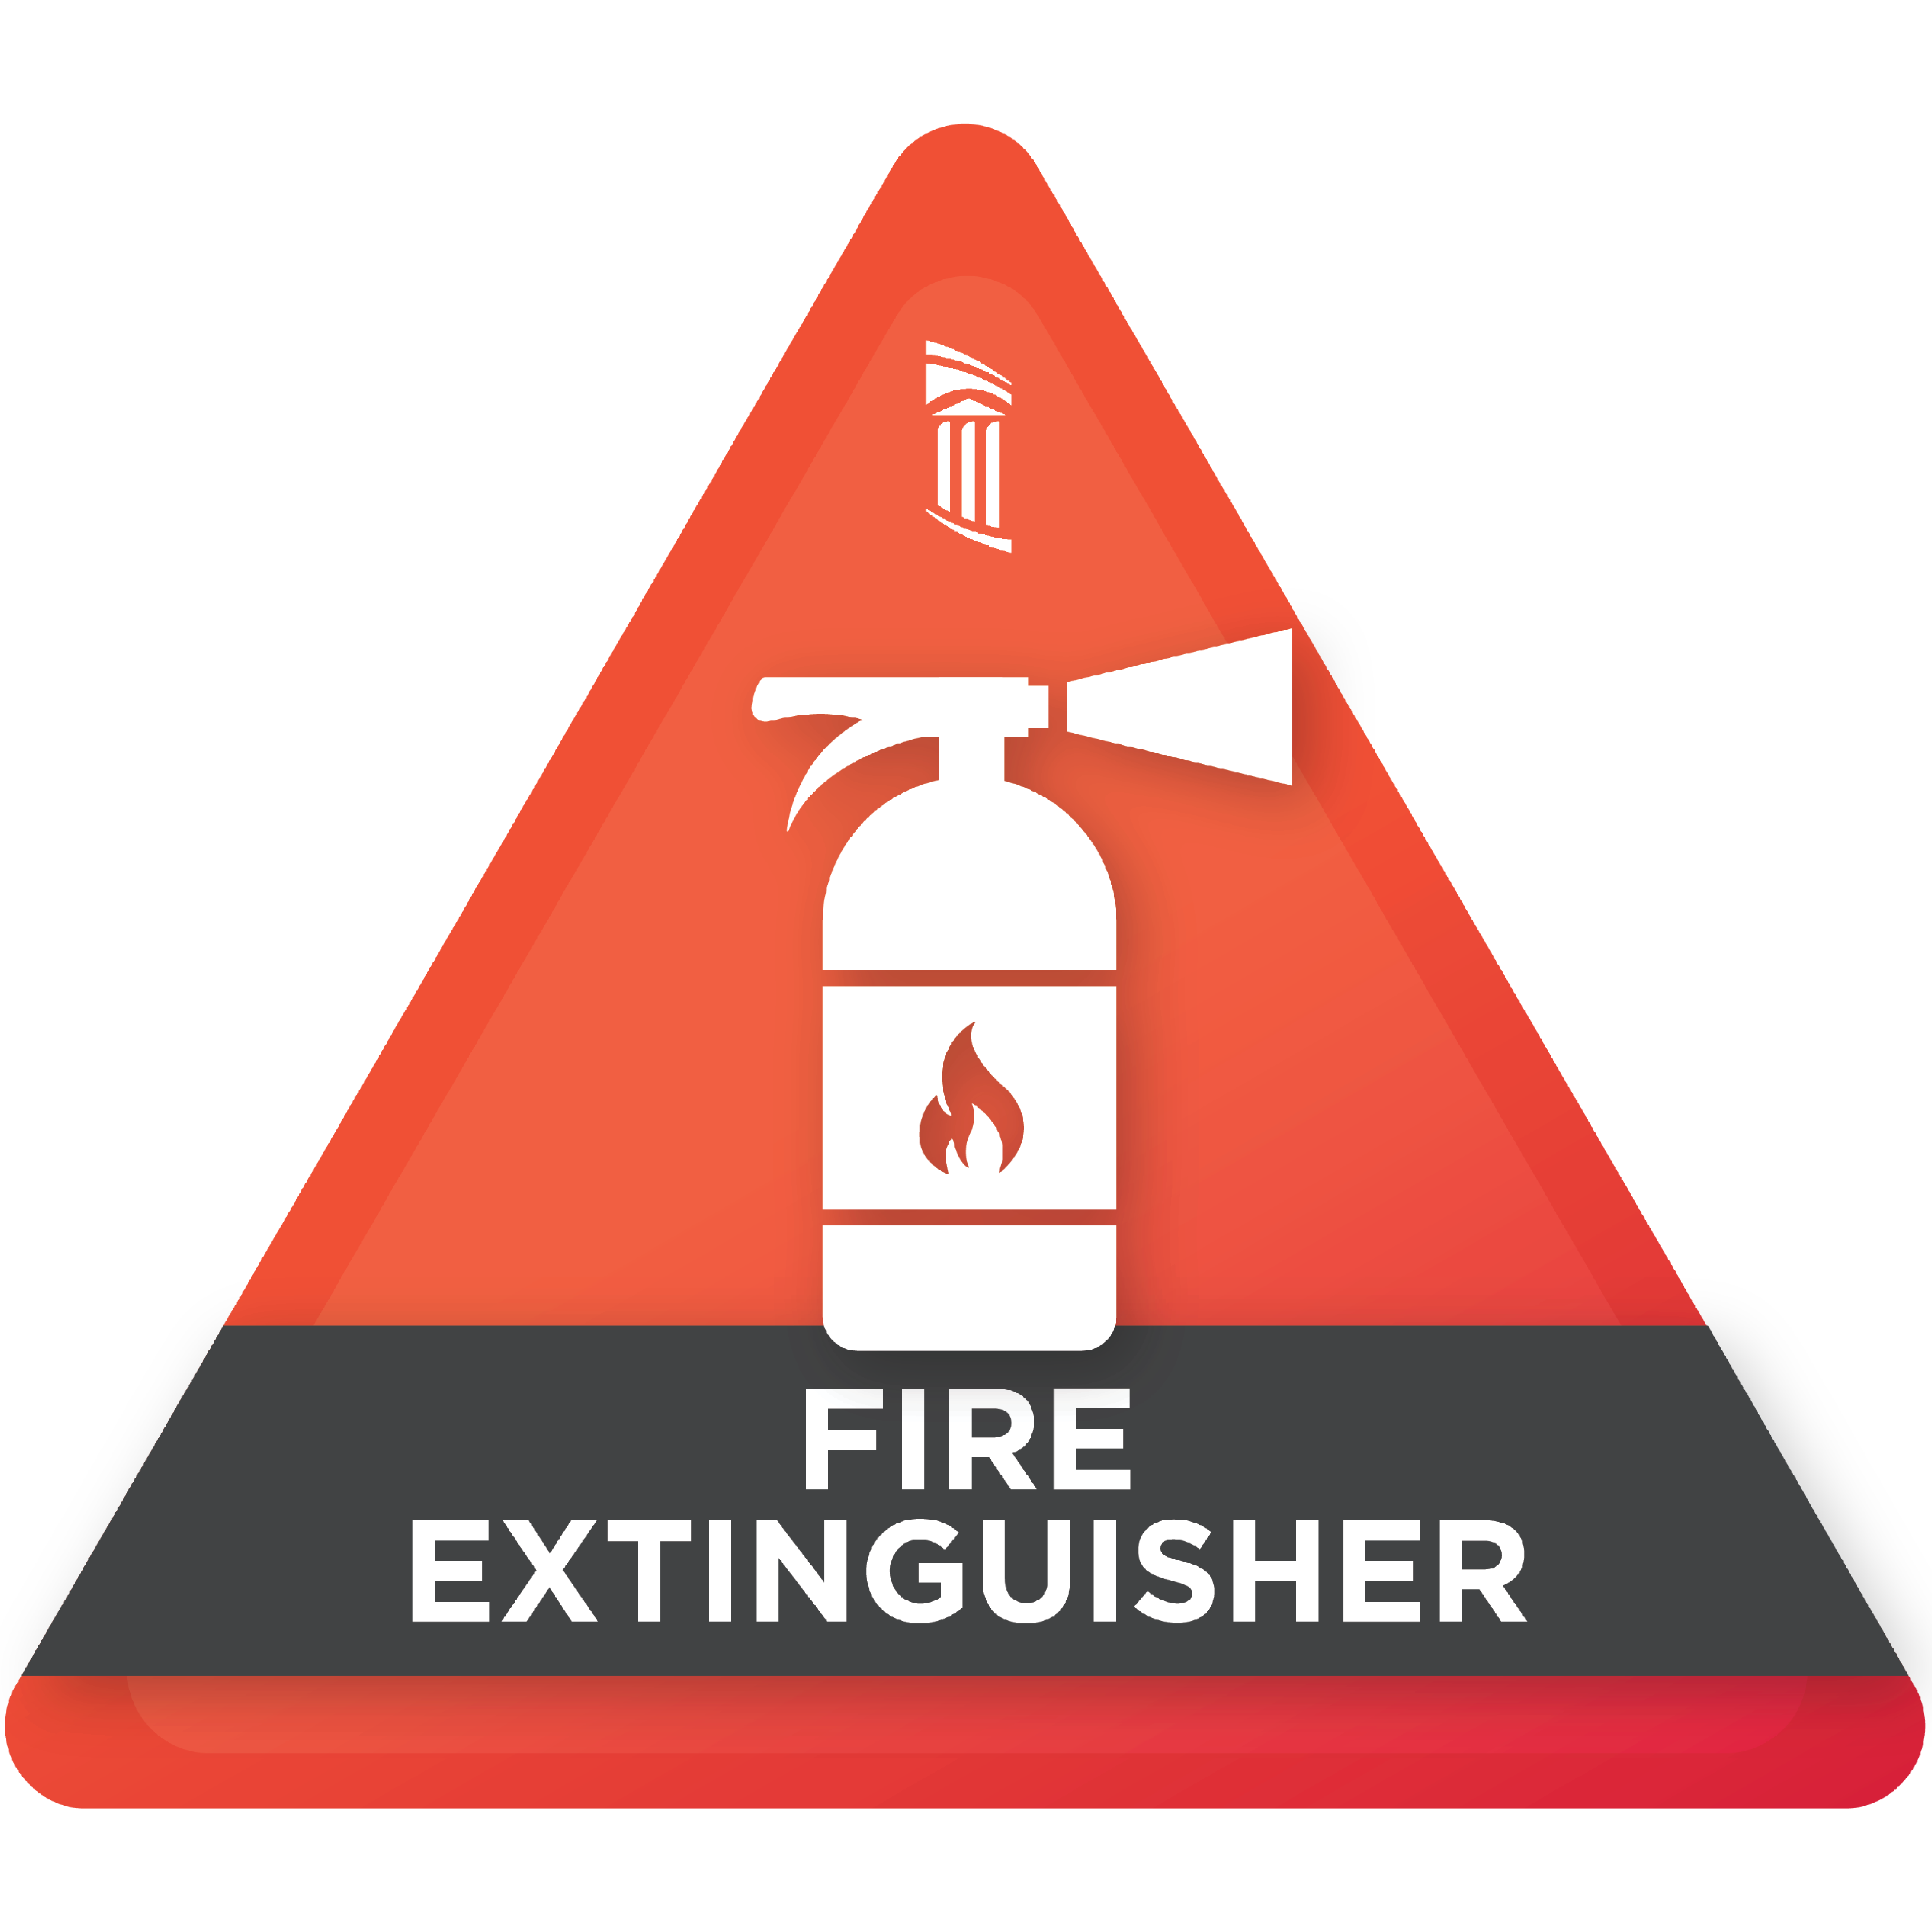 Fire Extinguisher Digital Micro-Credential